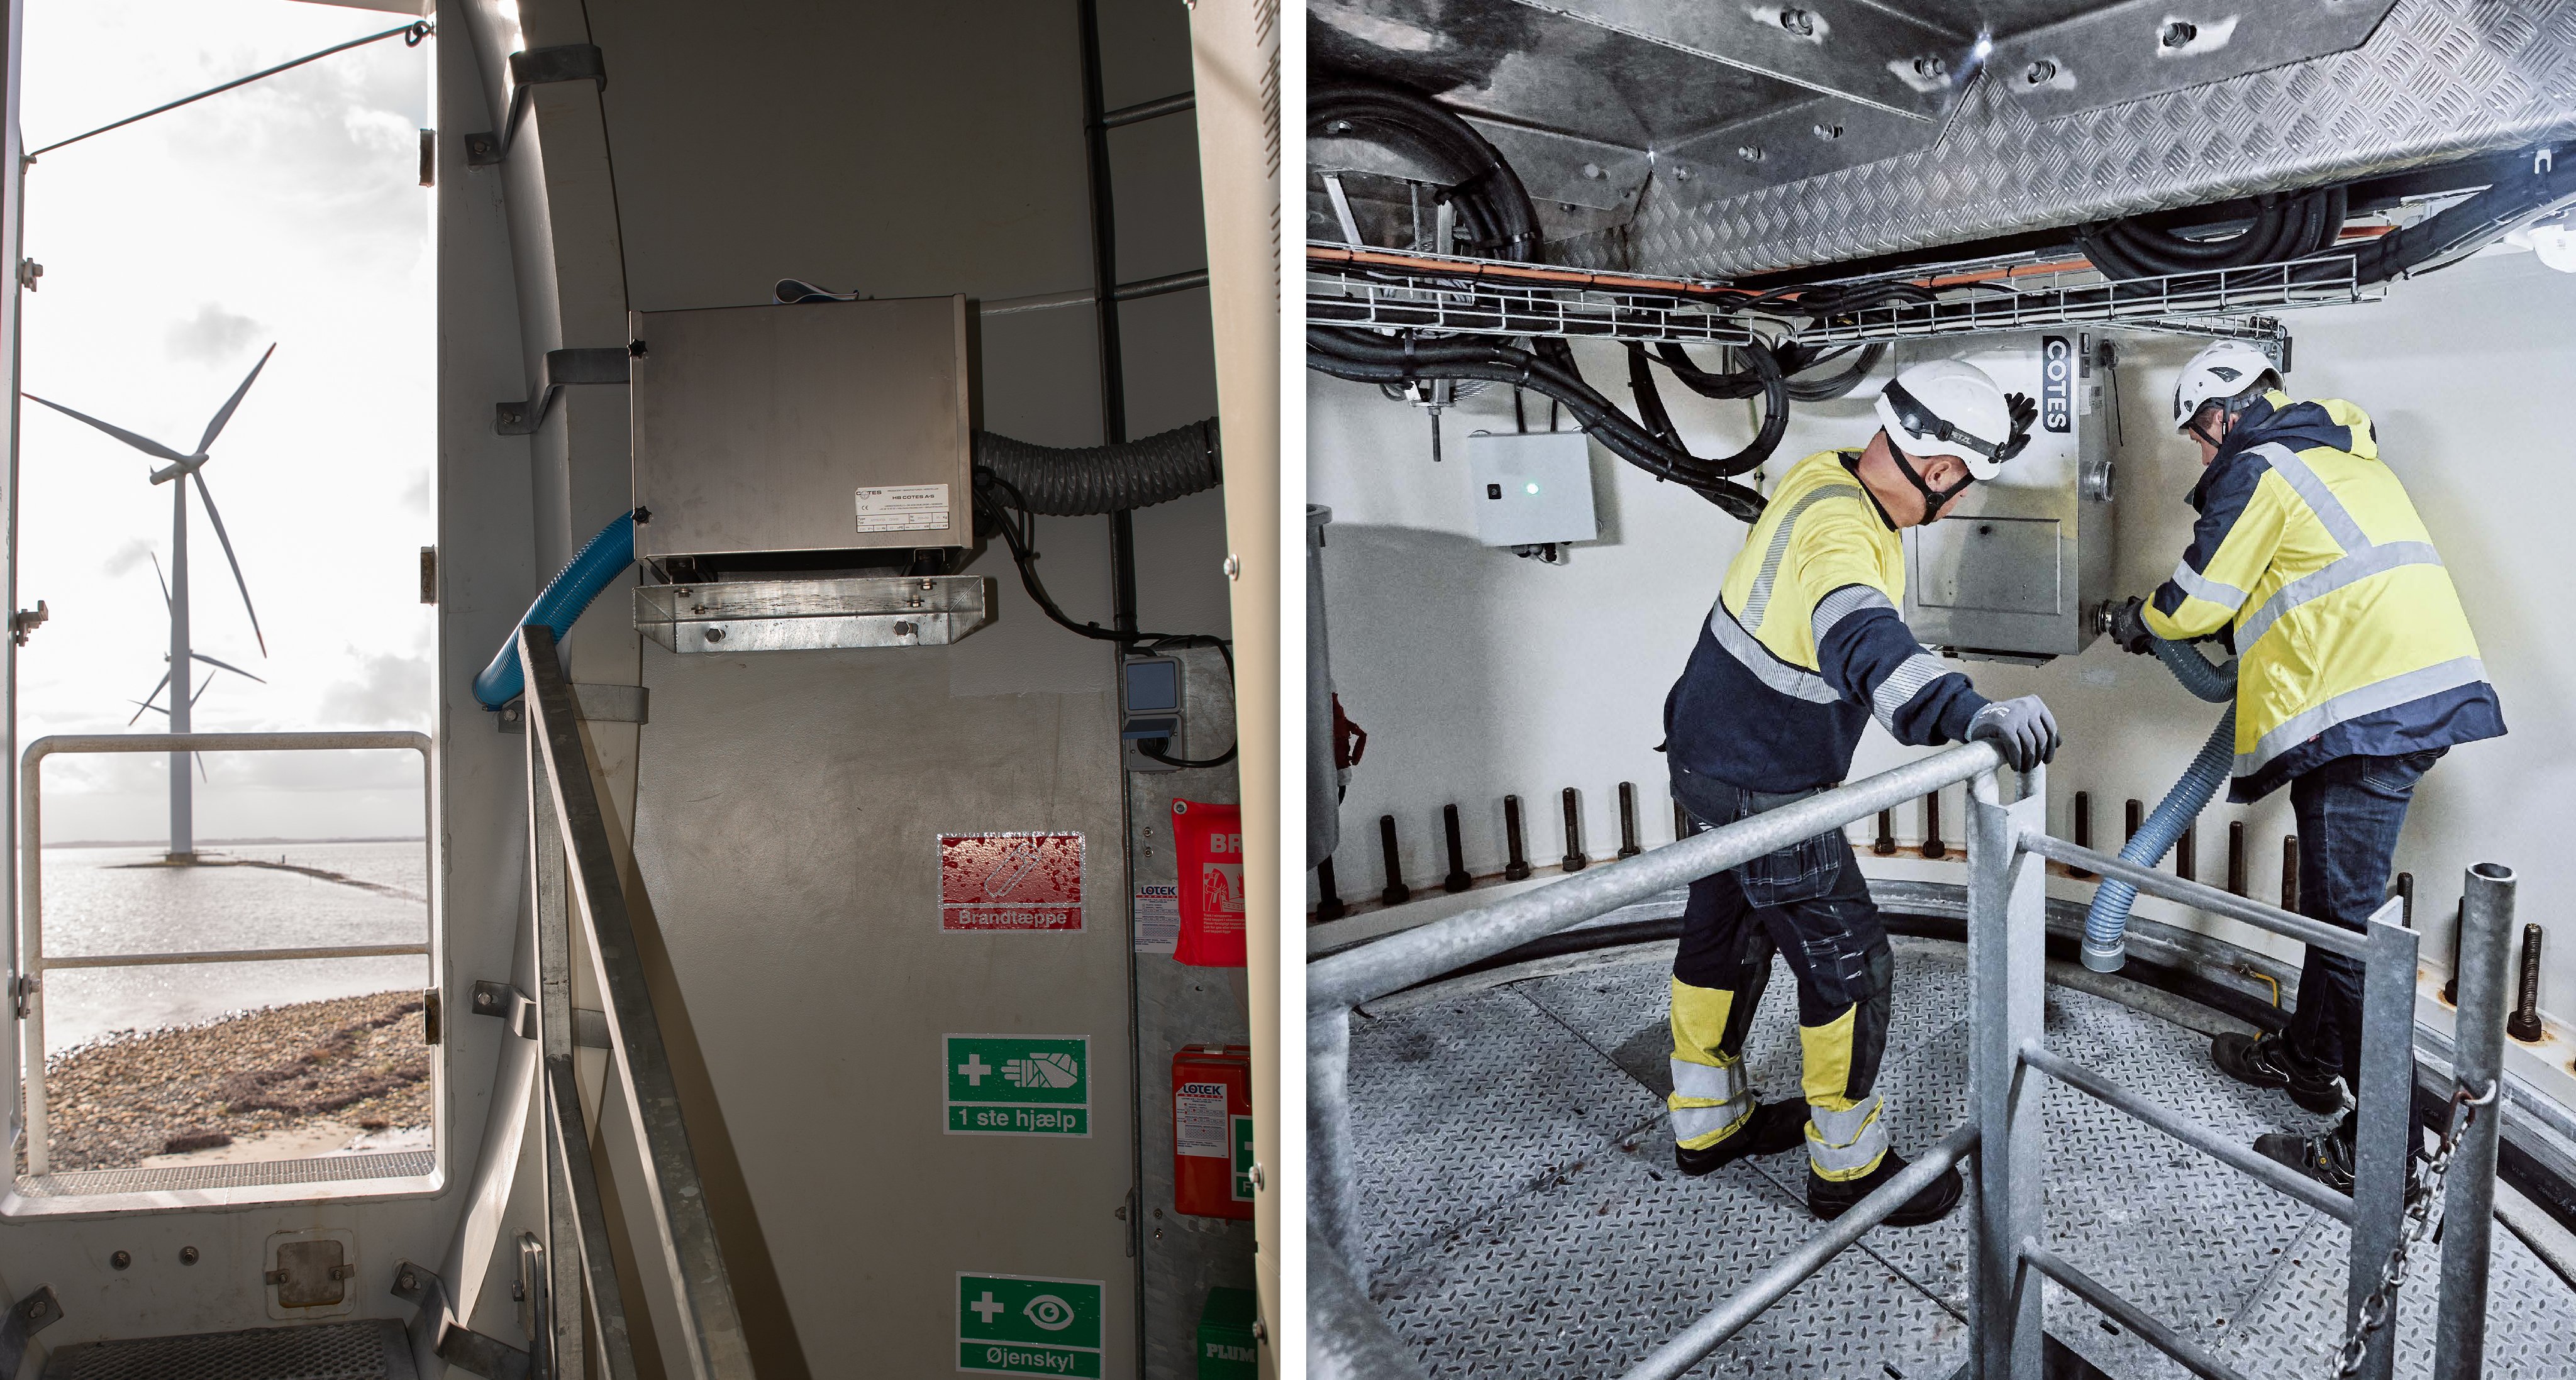 Image to left: Standard CR80 dehumidifier installation at the base of a 2.3 MW Siemens turbine tower. Image to right: New generation CWO unit installed in the tower creates an overpressure and removes moisture and salt from the air inside the turbine.